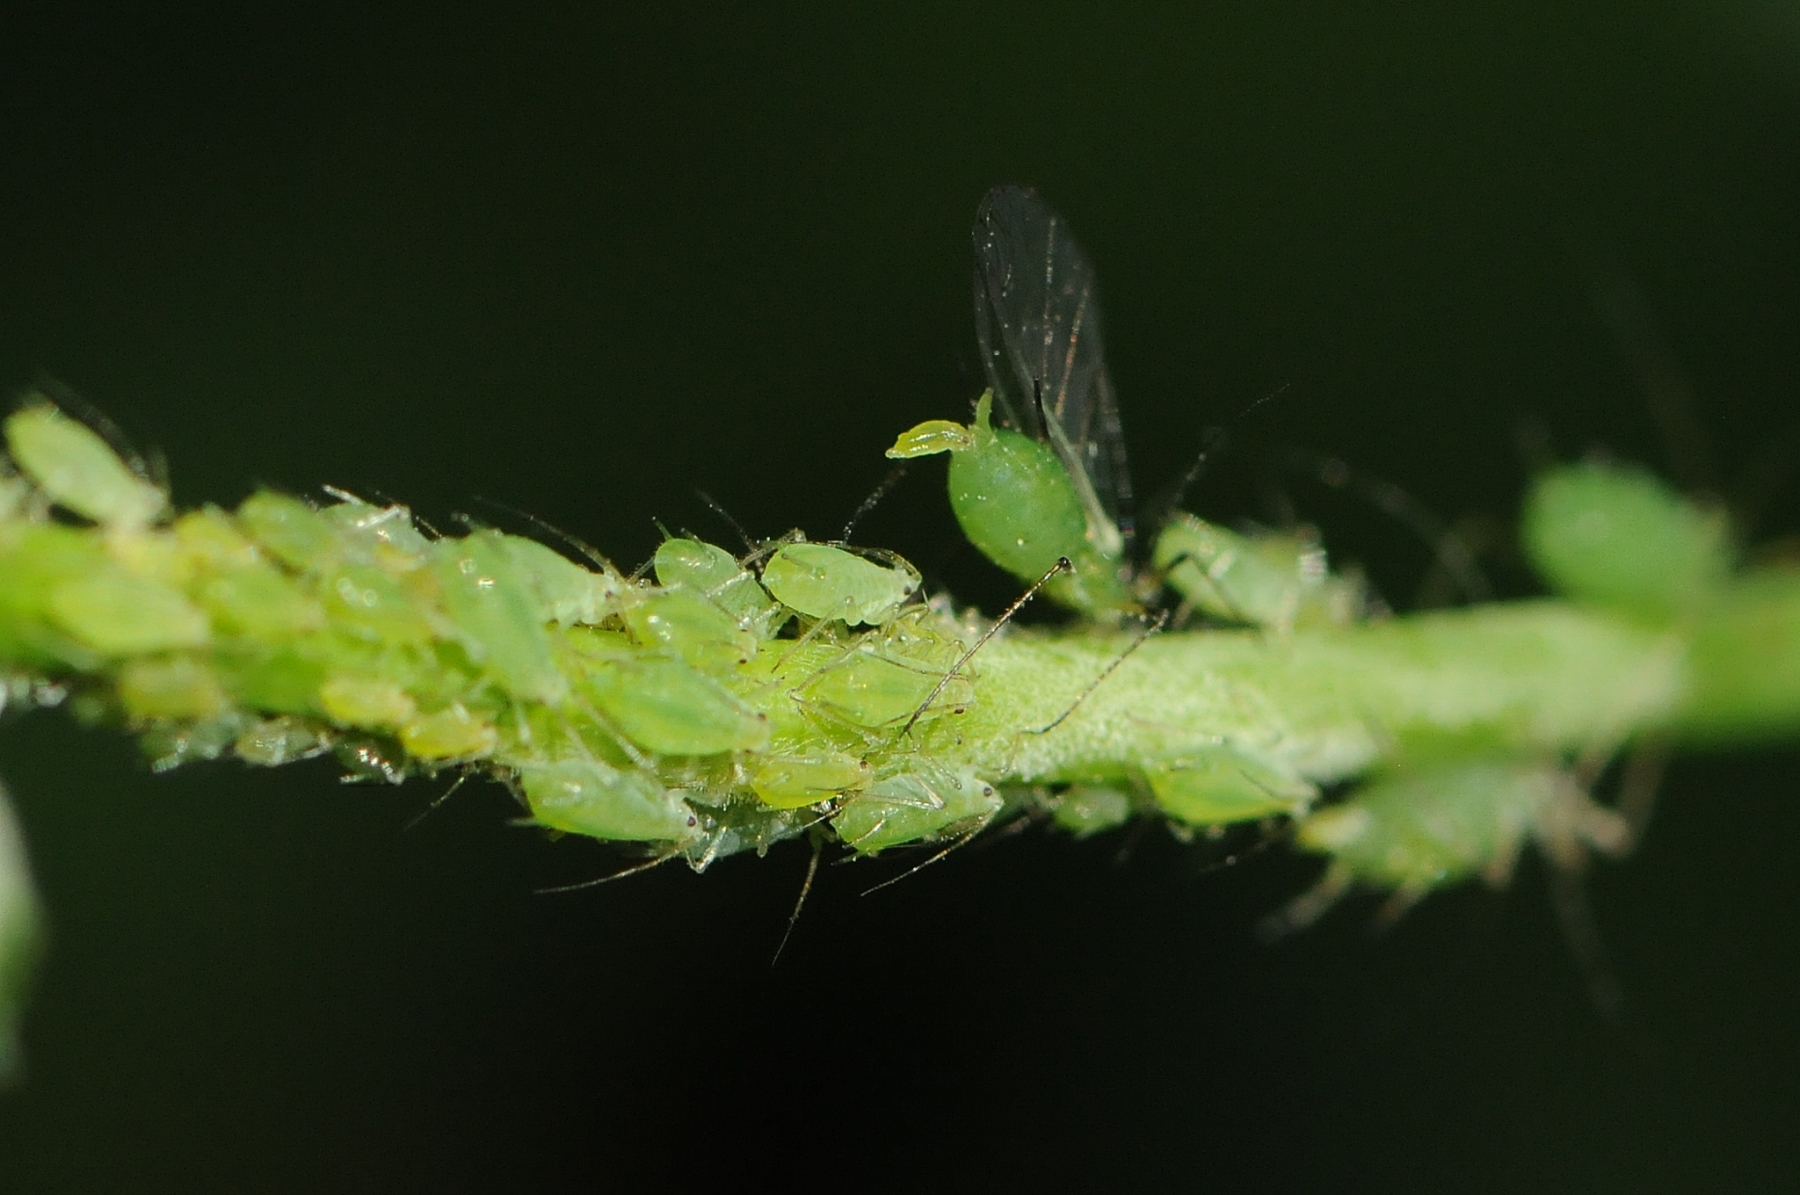 Aphid giving birth to young. Denaby Ings.